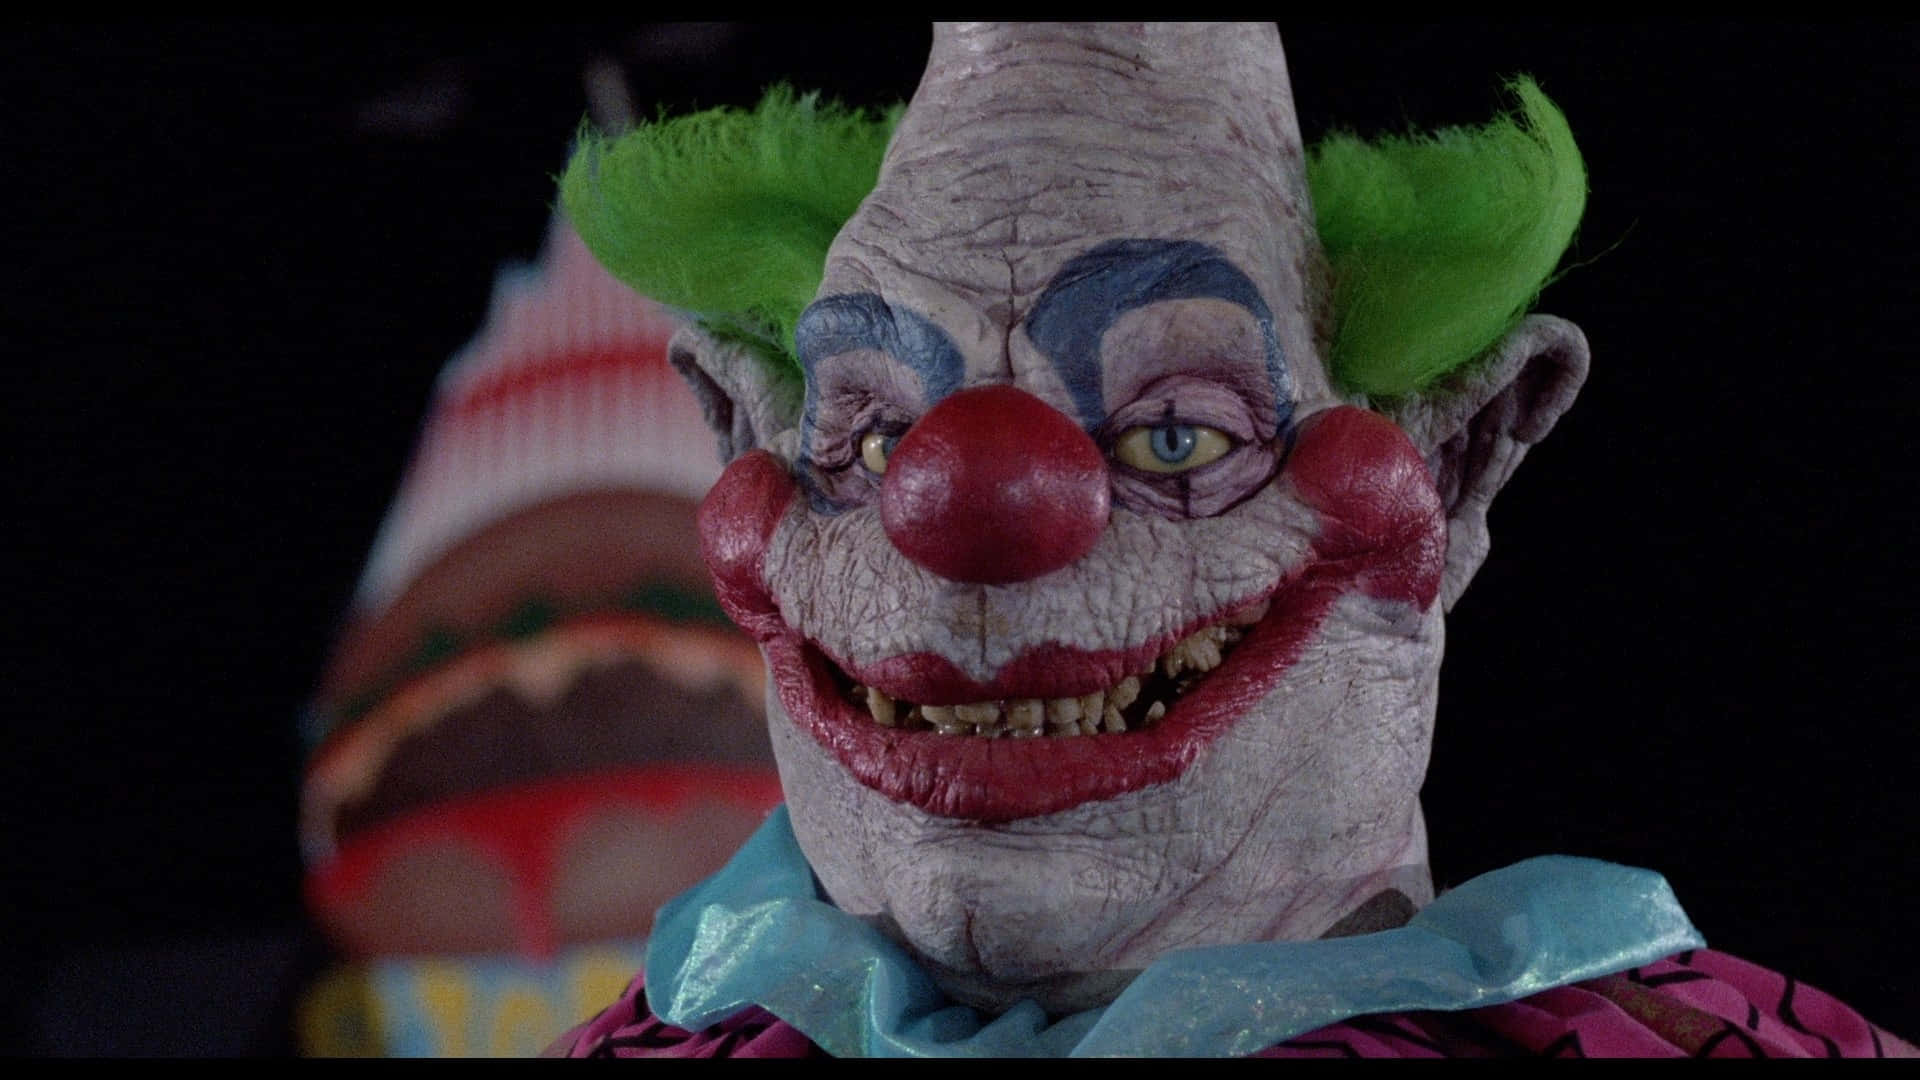 Join the crew of Killer Klowns From Outer Space and feel the chills! Wallpaper